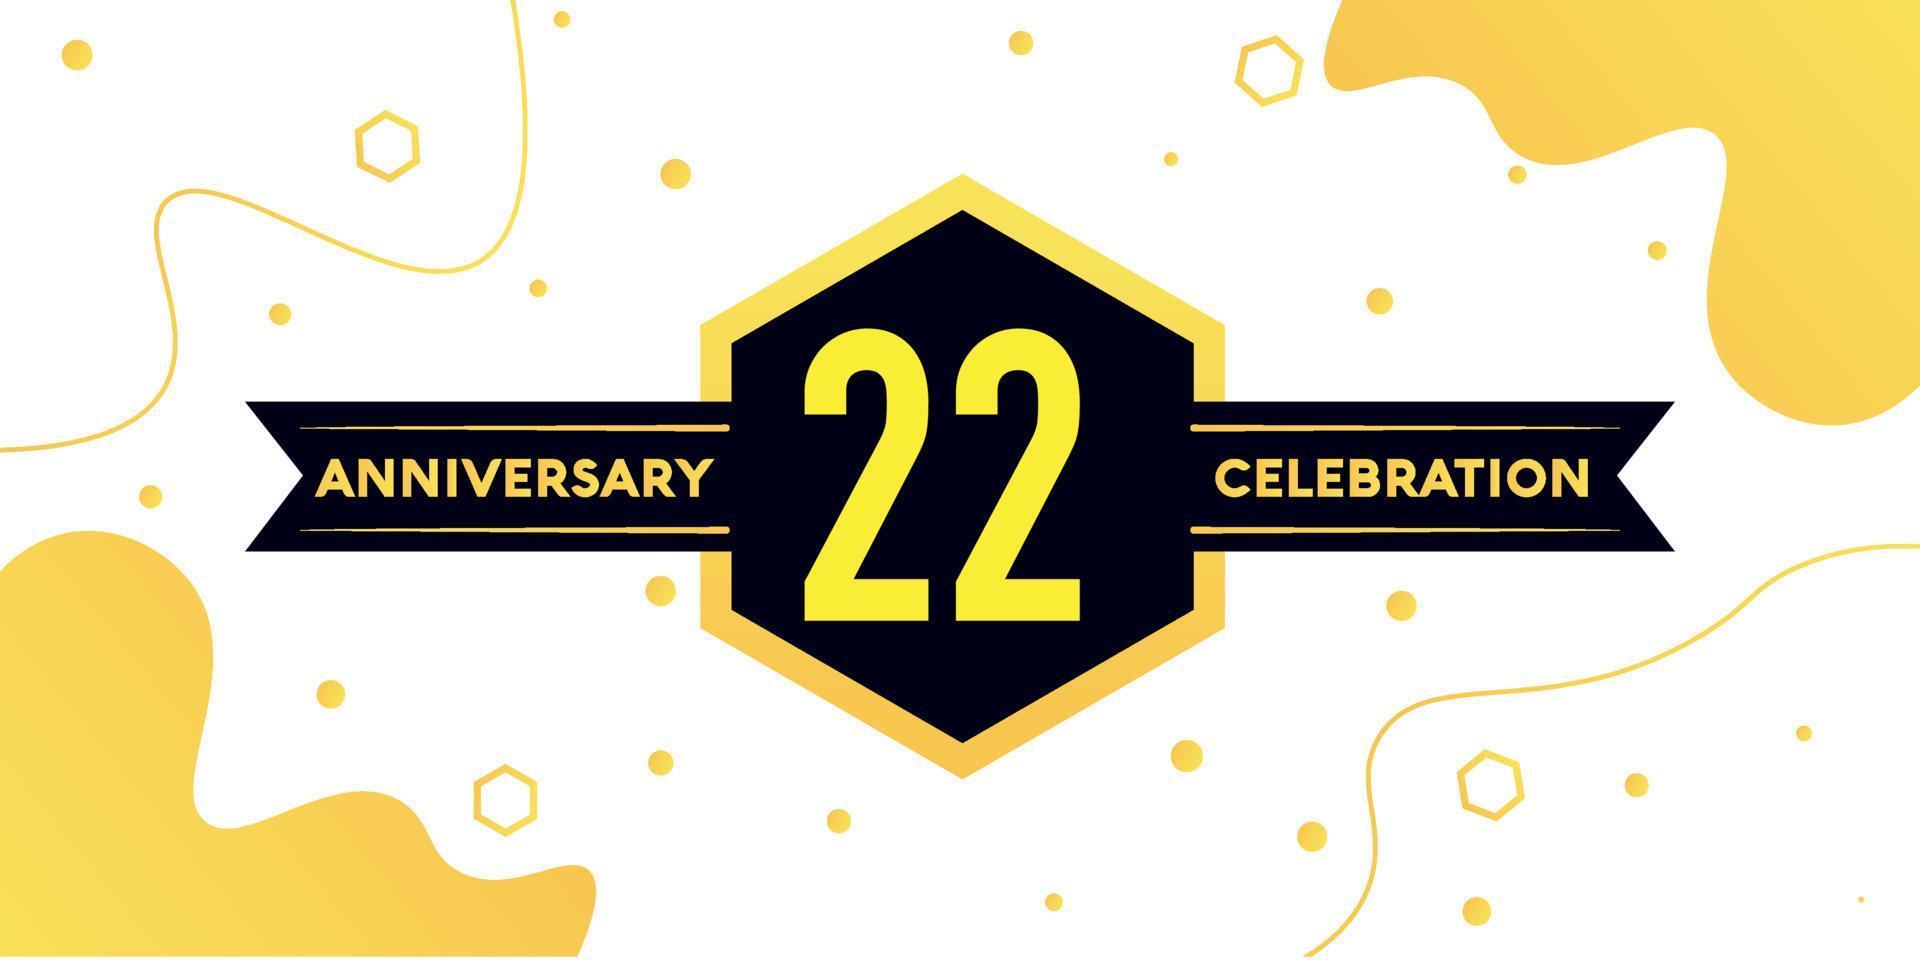 22 years anniversary logo vector design with yellow geometric shape with black and abstract design on white background template